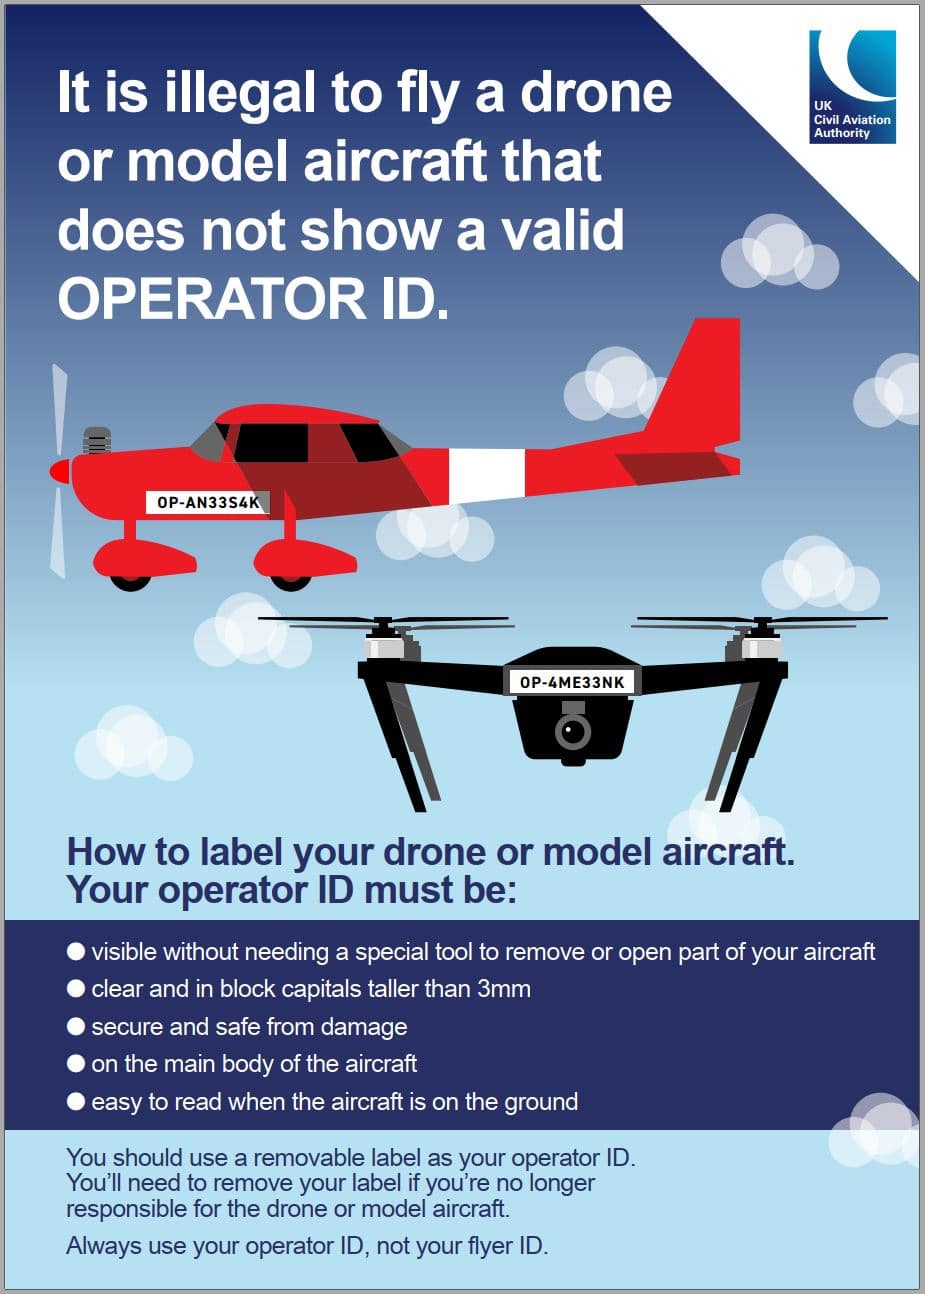 mandatory drone registration scheme from the CAA.